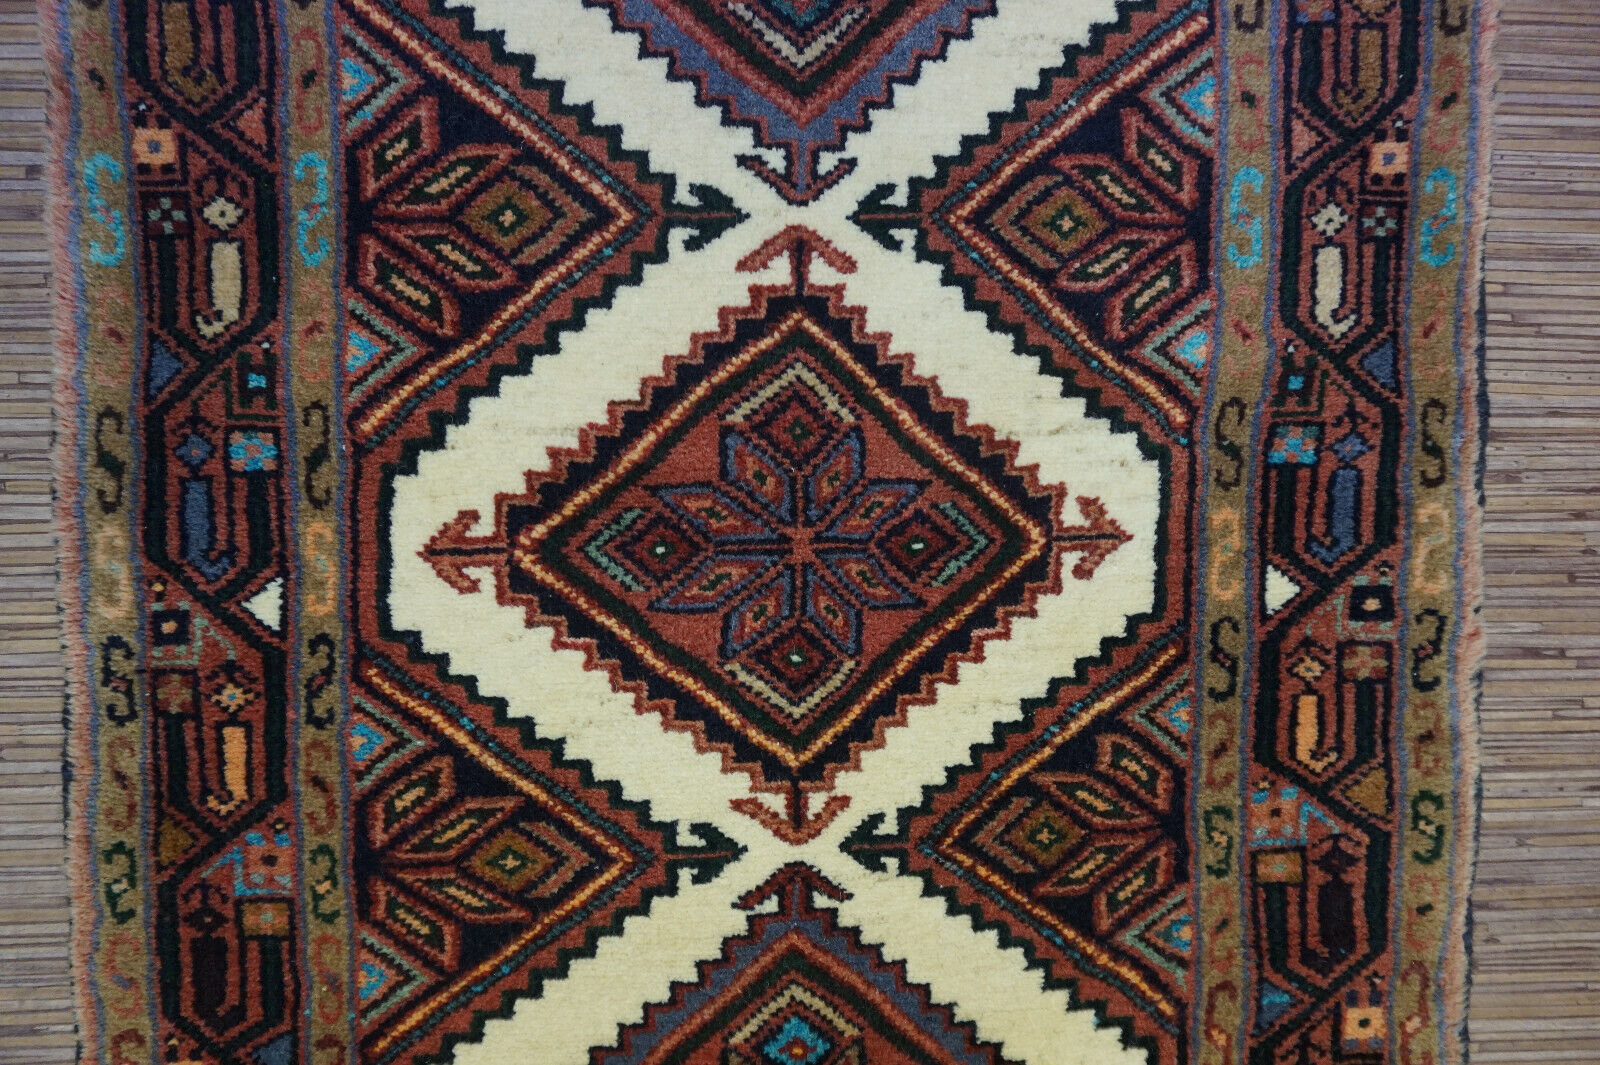 Detailed geometric and symmetrical designs in brown, white, blue, and red